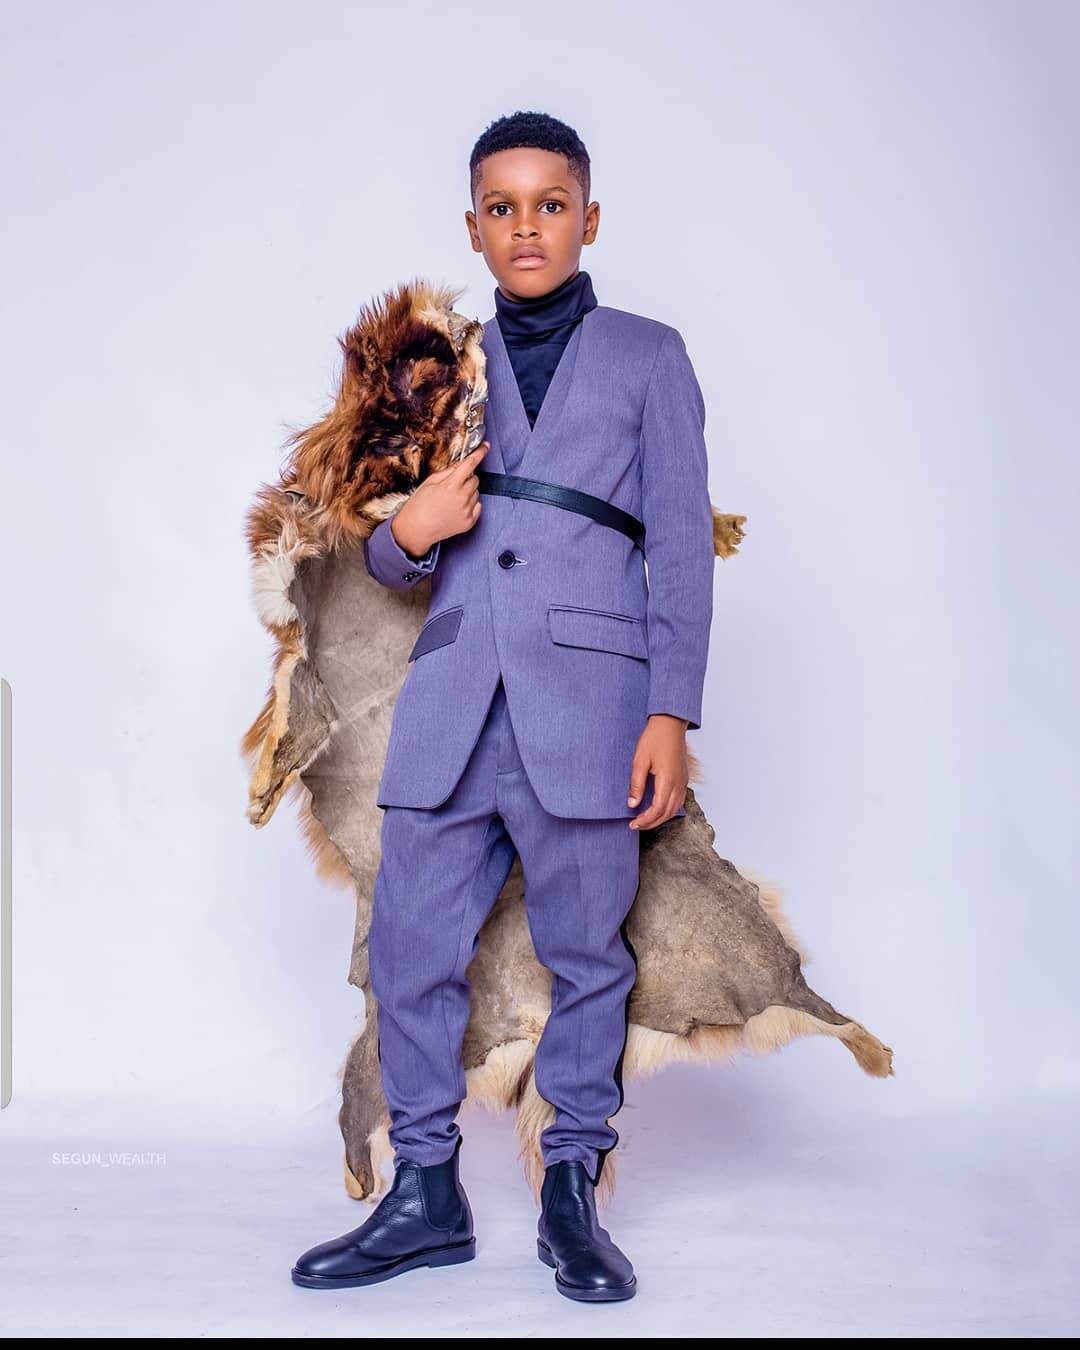 Angela Okorie & Son Chamberline Rock Matching Looks for his Birthday